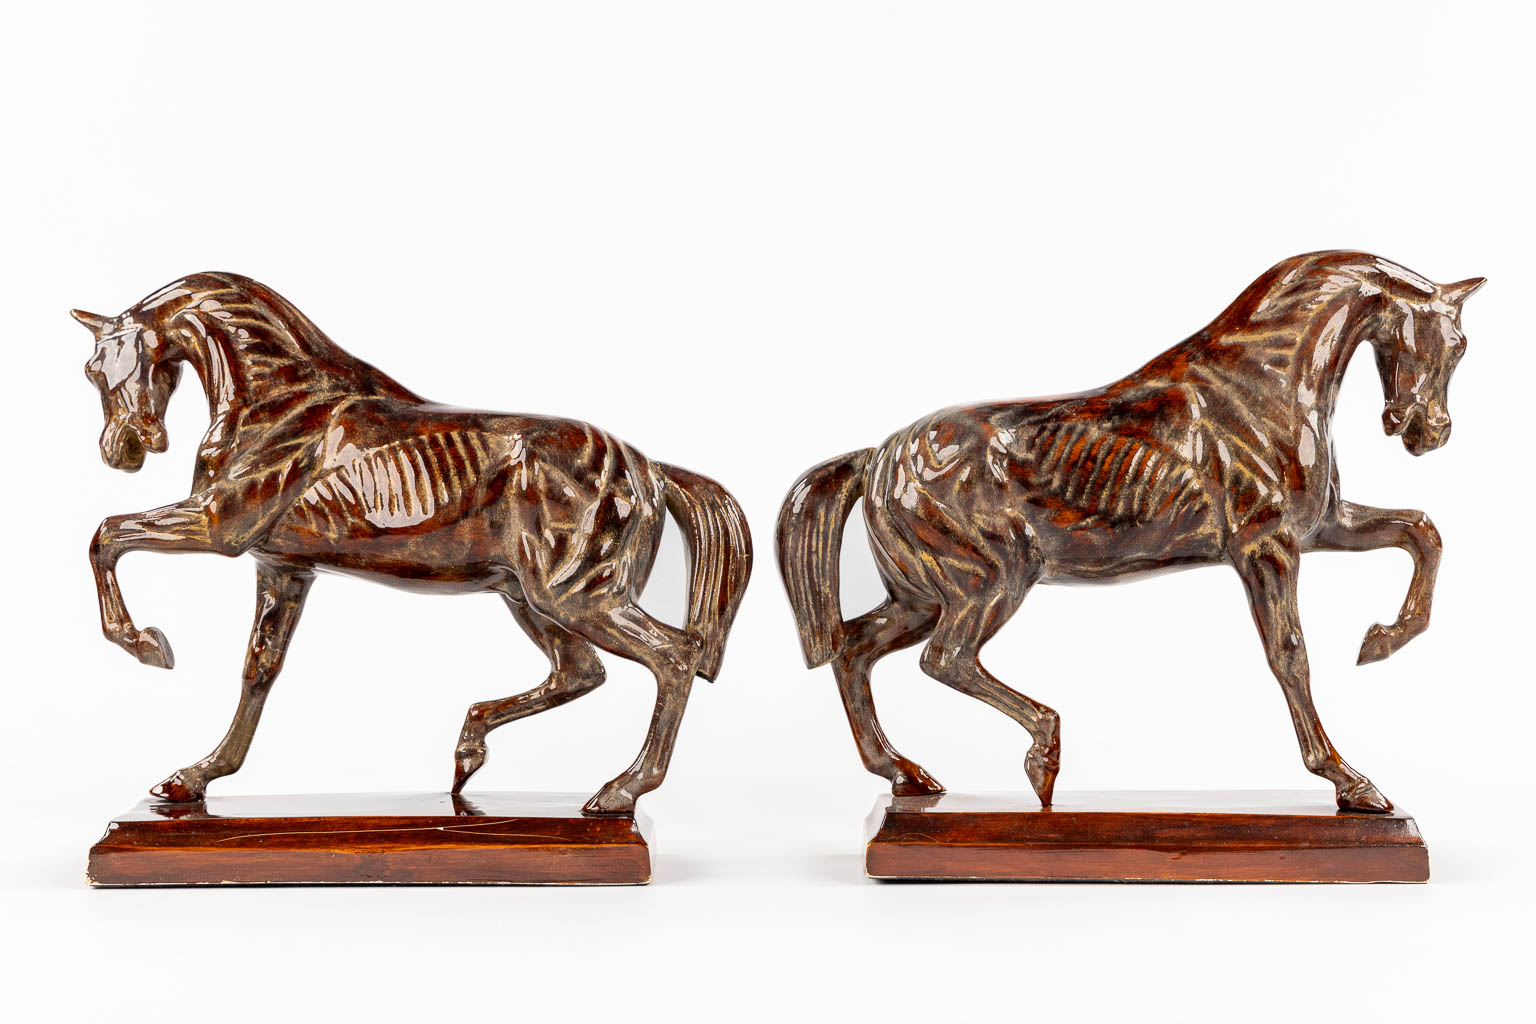 A pair of table lamps, gilt metal docorated with horse figurines. Circa 1980. (W:37 x H:64 cm)